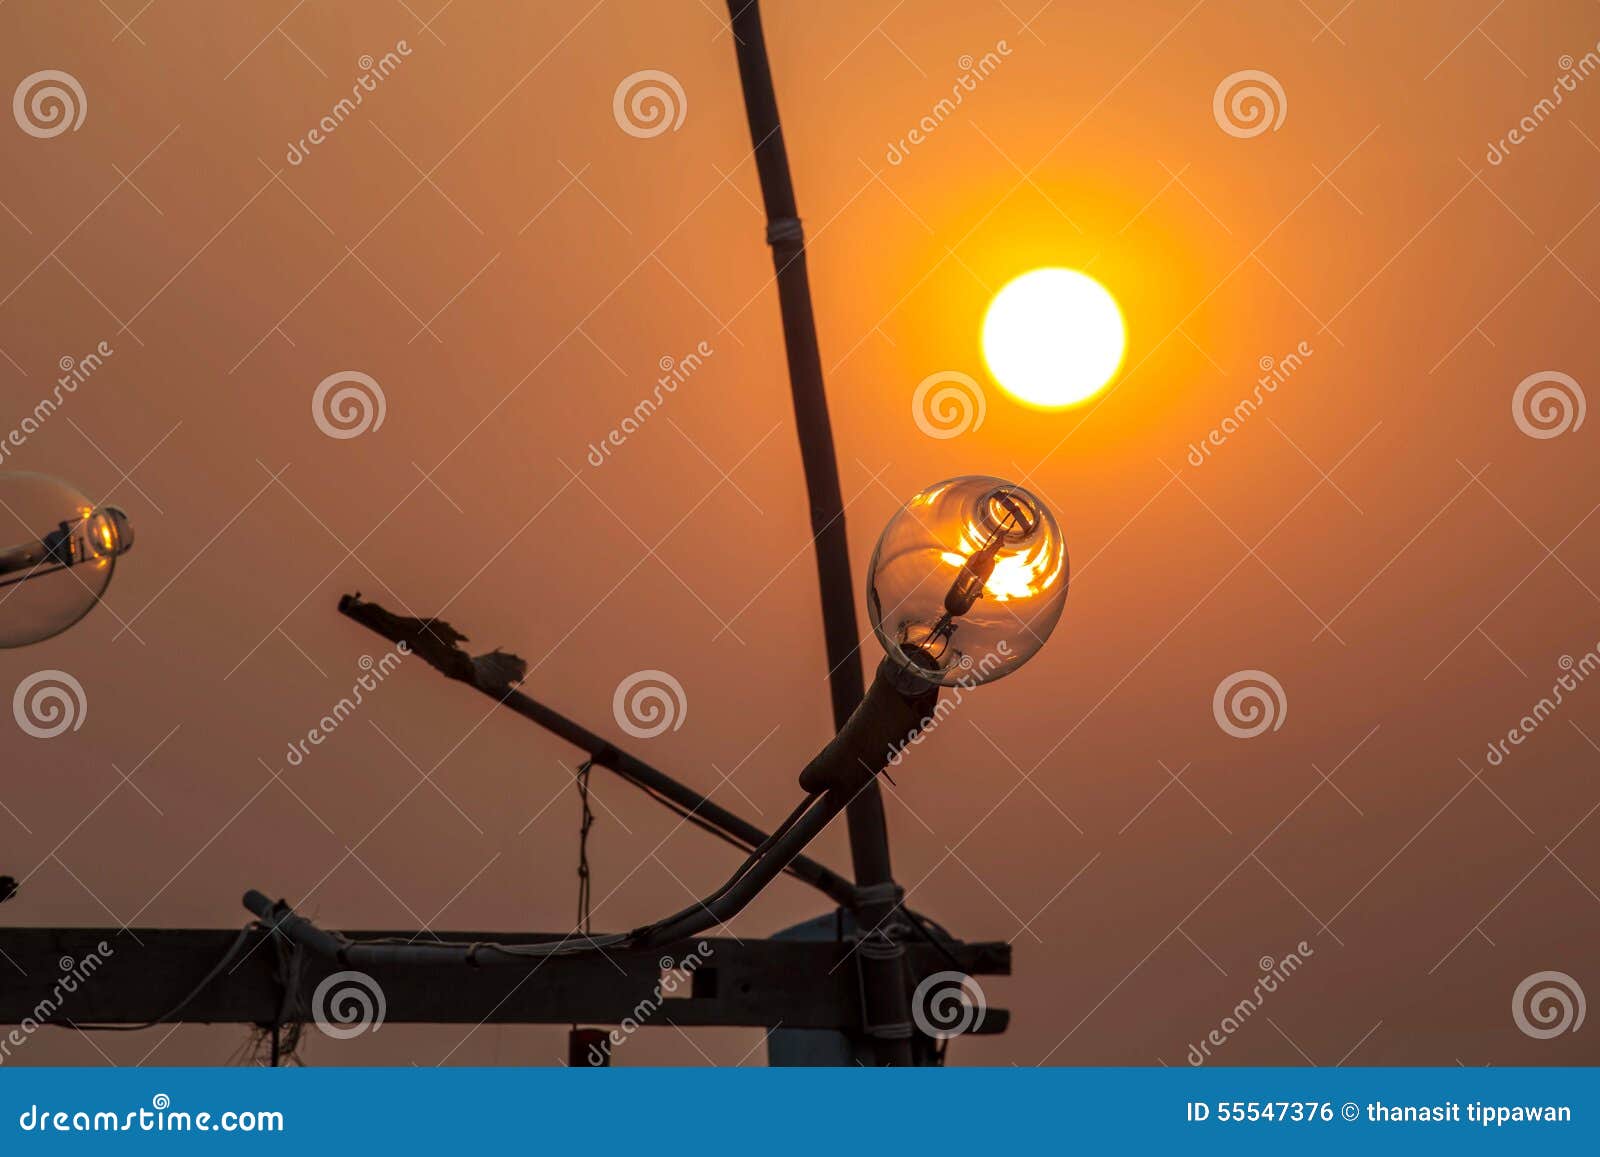 https://thumbs.dreamstime.com/z/light-boat-squid-fishing-bulb-used-night-to-attract-animals-water-surface-55547376.jpg